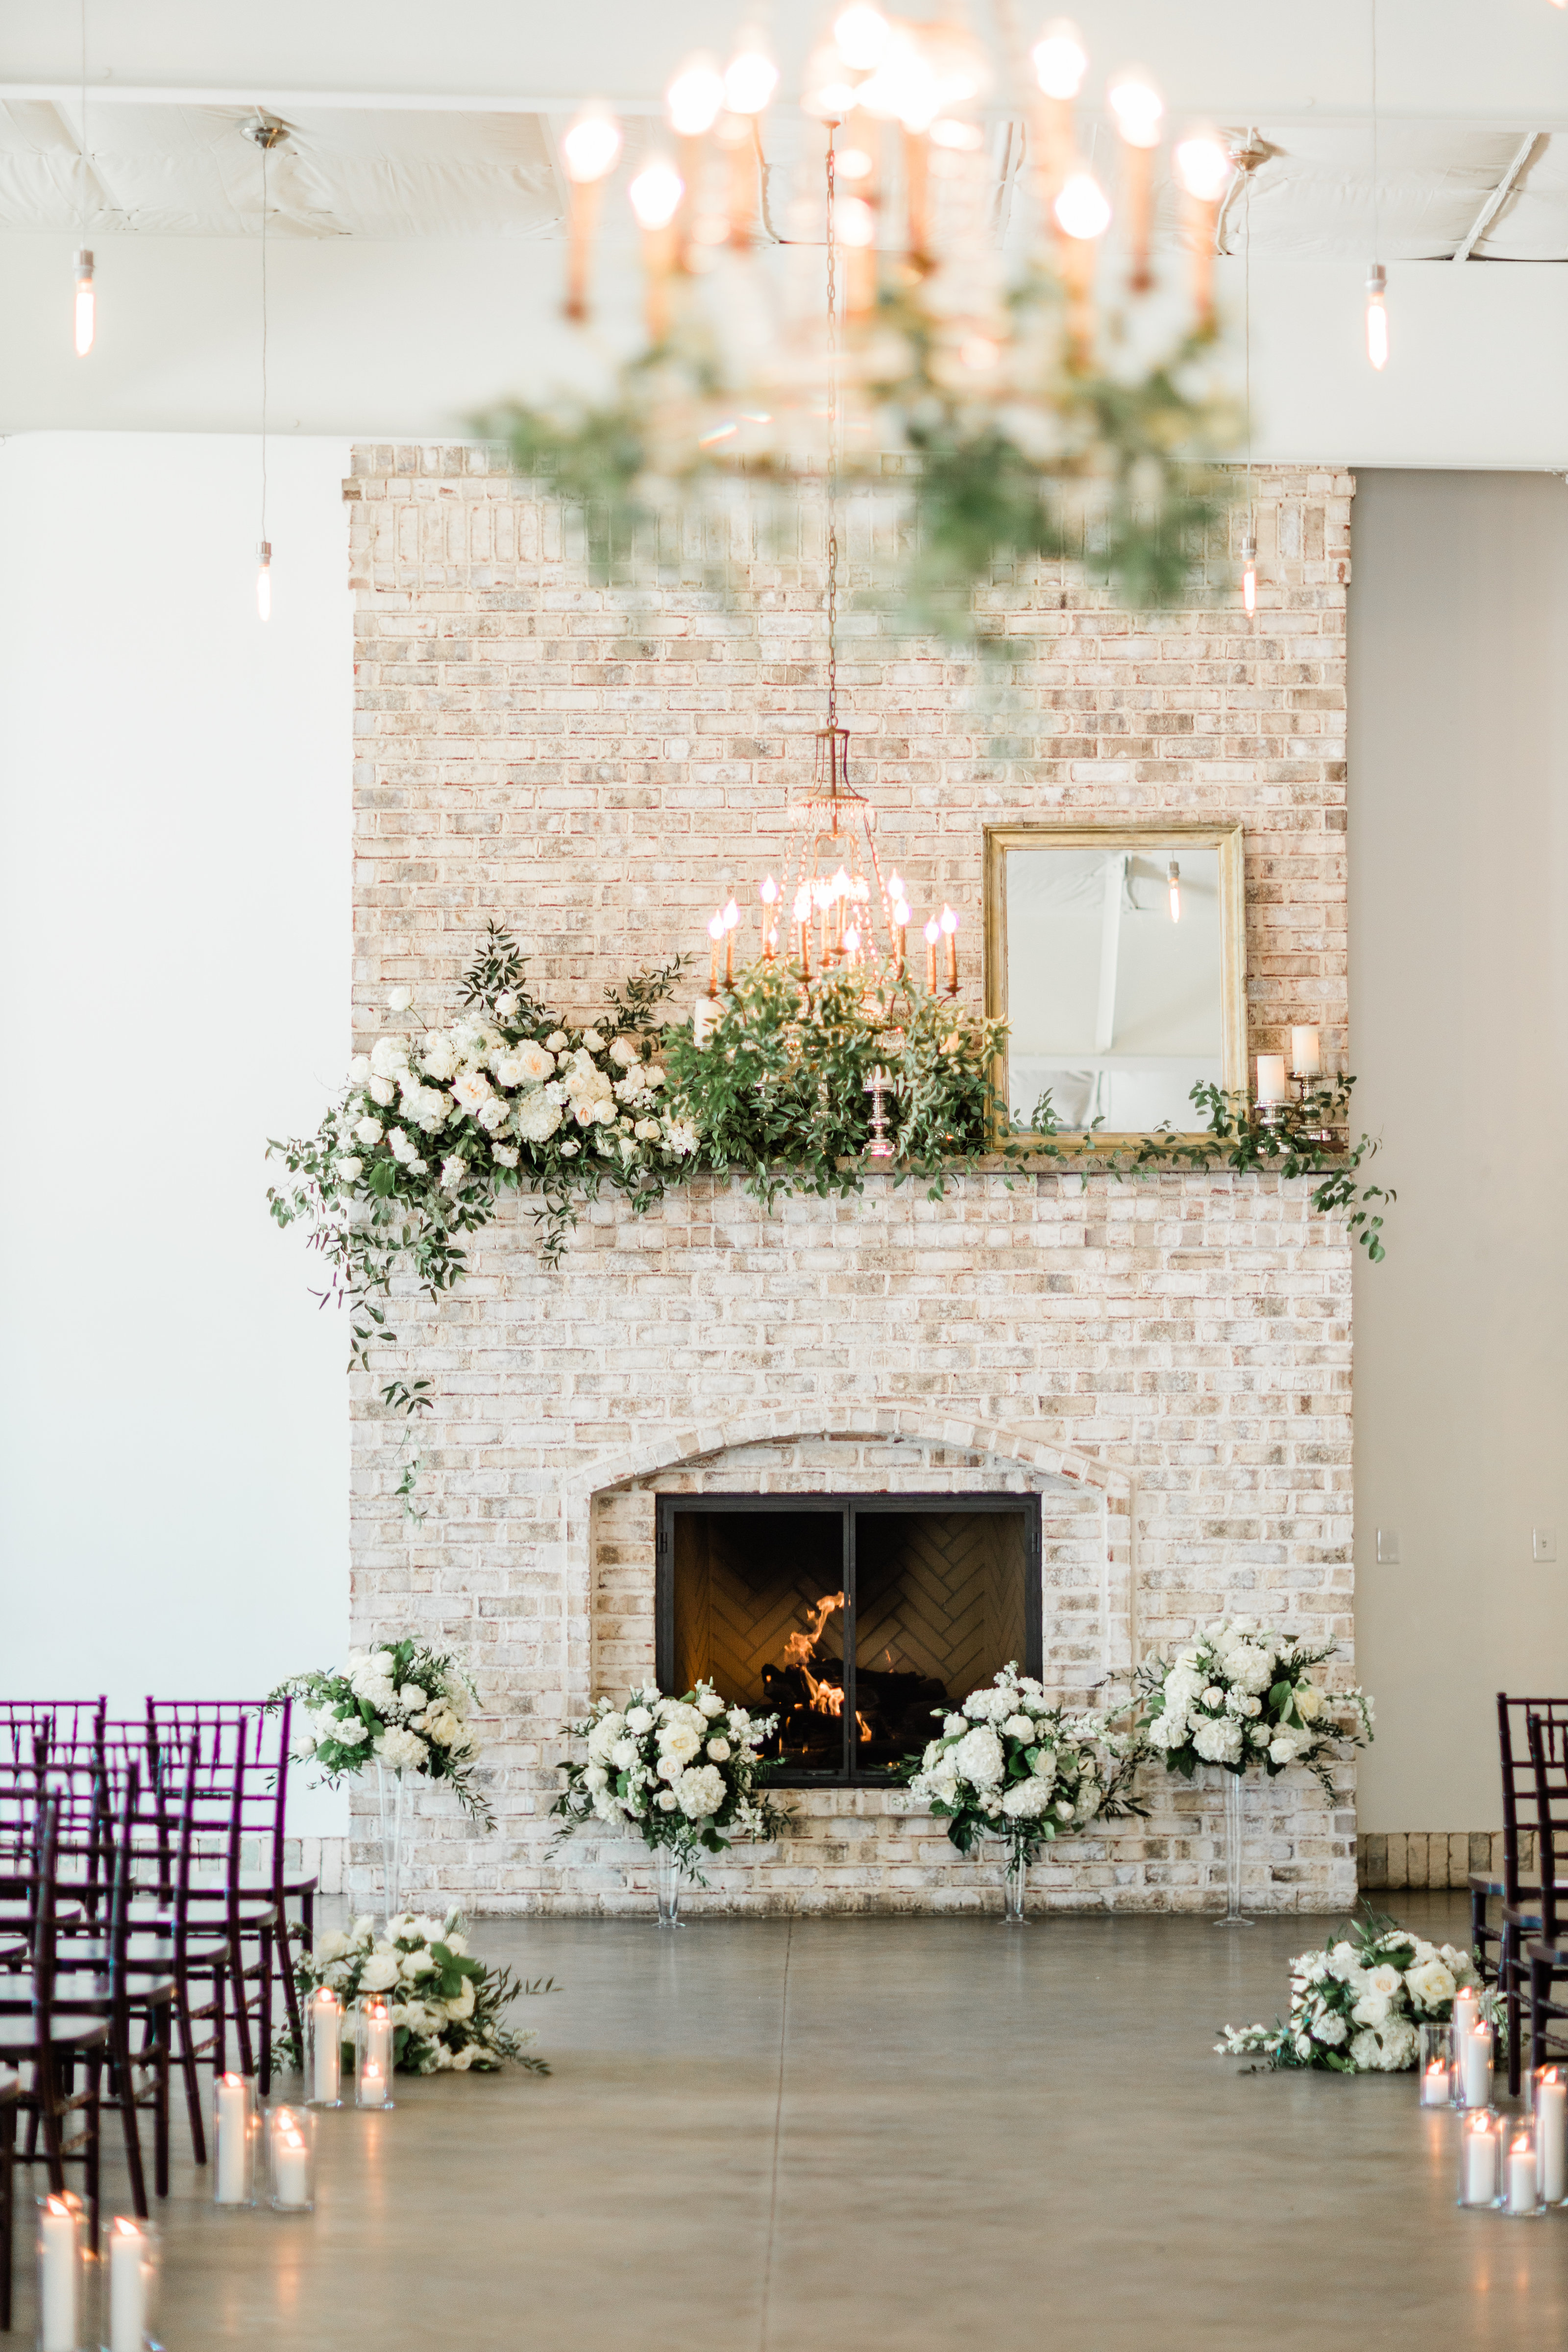 The fireplace at Wrightsville Manor beautifully done up for a wedding